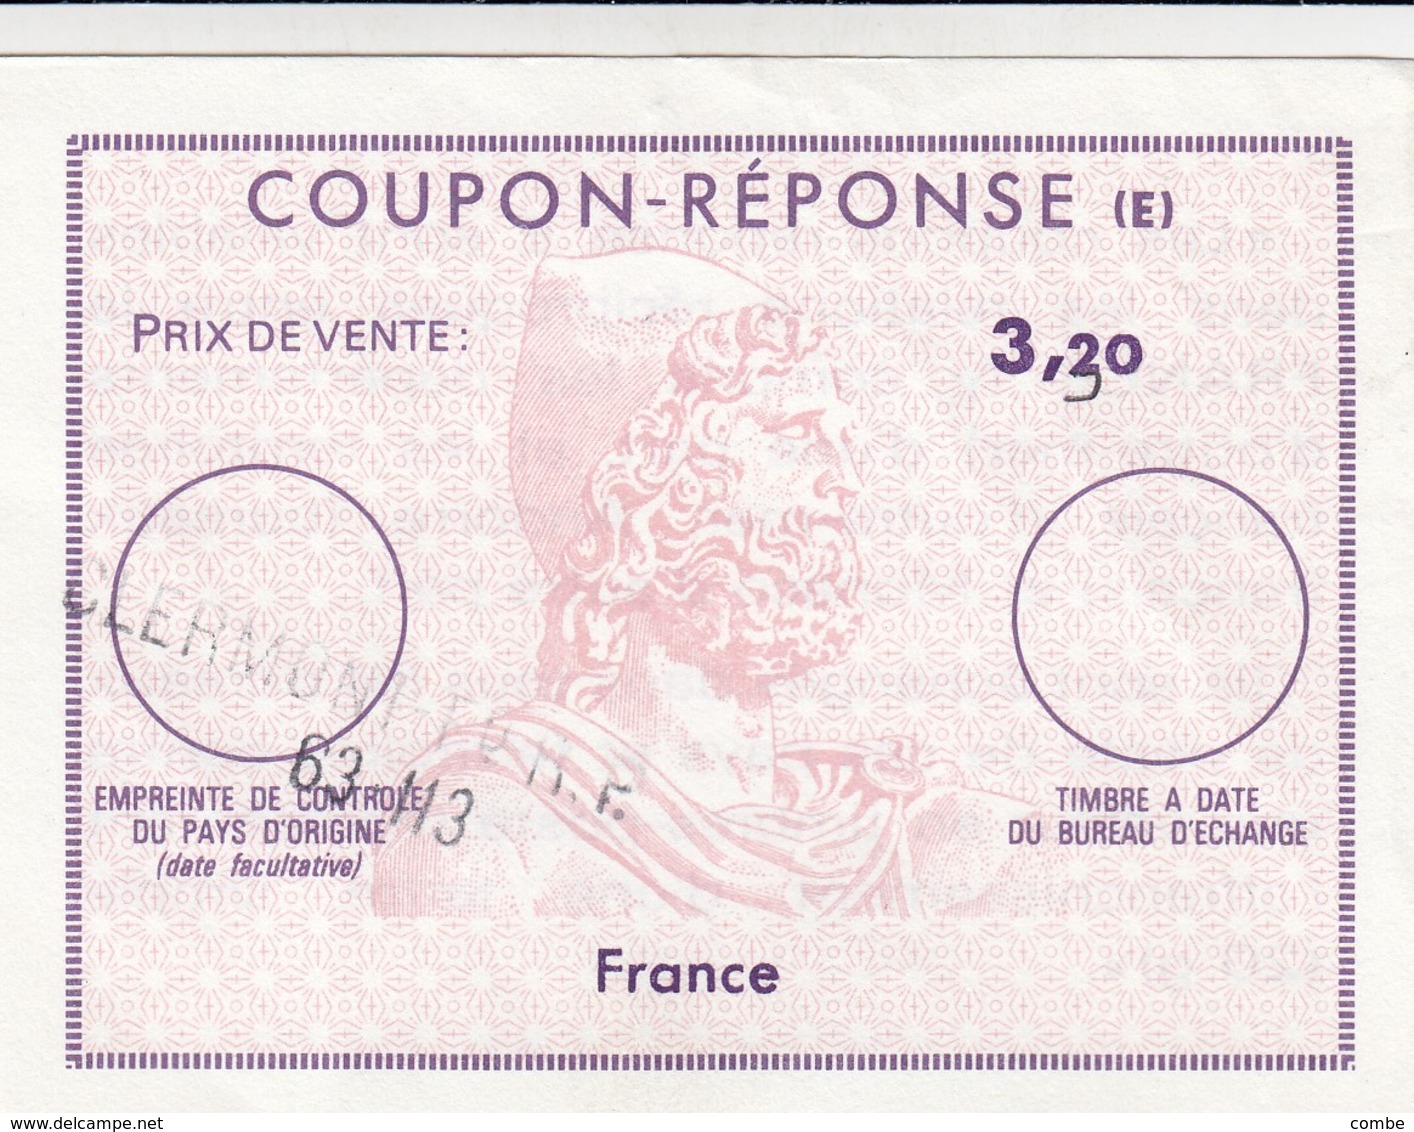 COUPON-REPONSE. E. FRANCE 3,20 RECTIFIÉ 3,30. CLERMONT Fd RP / 63 N3    / 2 - Reply Coupons